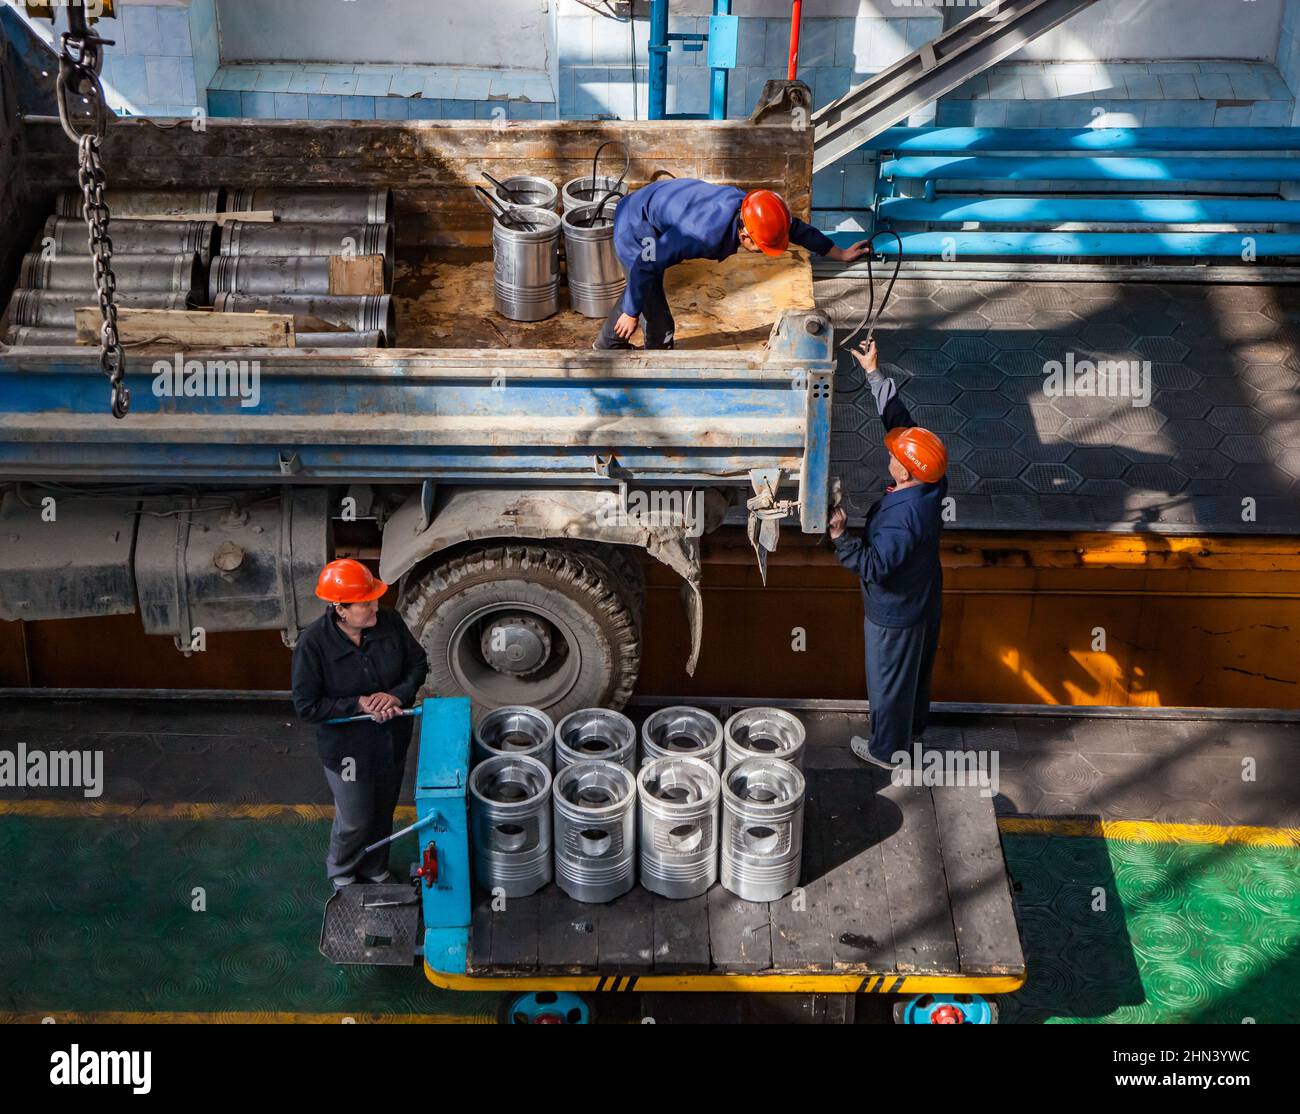 Kazaly, Kazakhstan - May 02, 2012: Locomotive repair plant. Workers loading loco diesel engine pistons by the crane from truck to trolley. Stock Photo